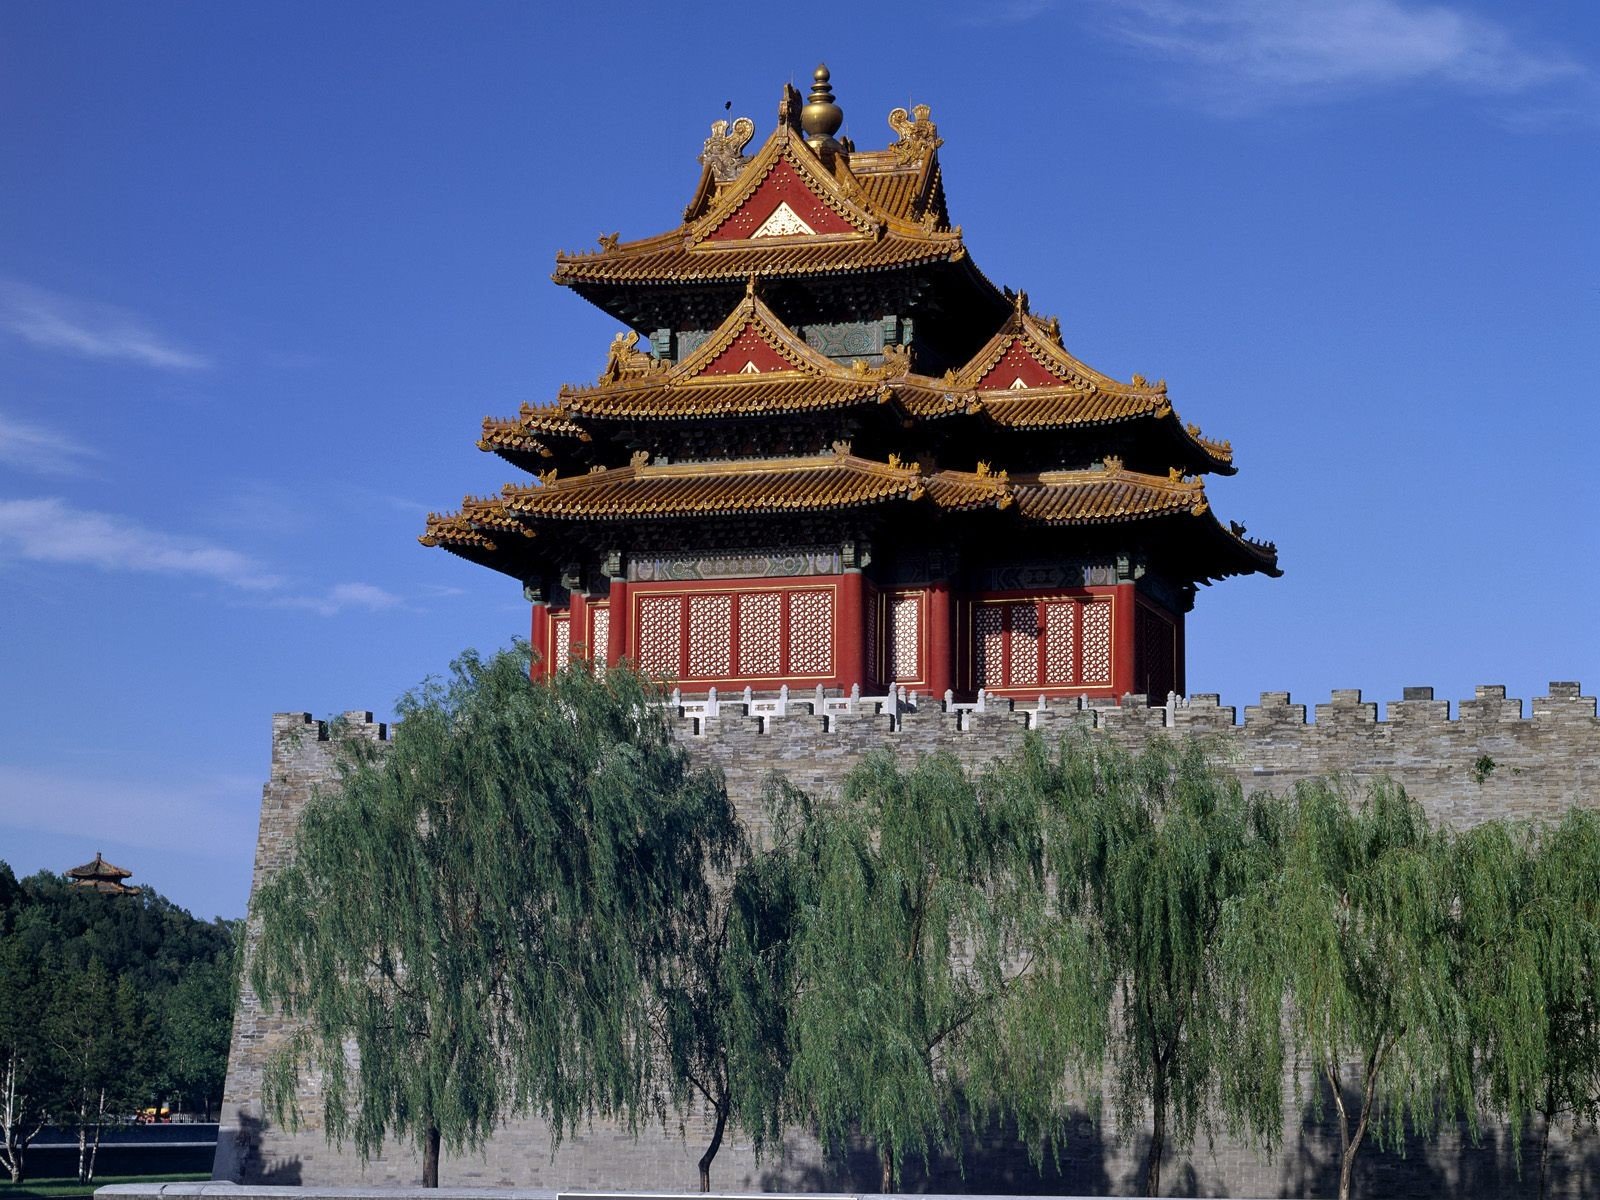 Asia, Architecture, Building, Ancient, Trees, Forbidden City, Corner tower, Wall Wallpaper